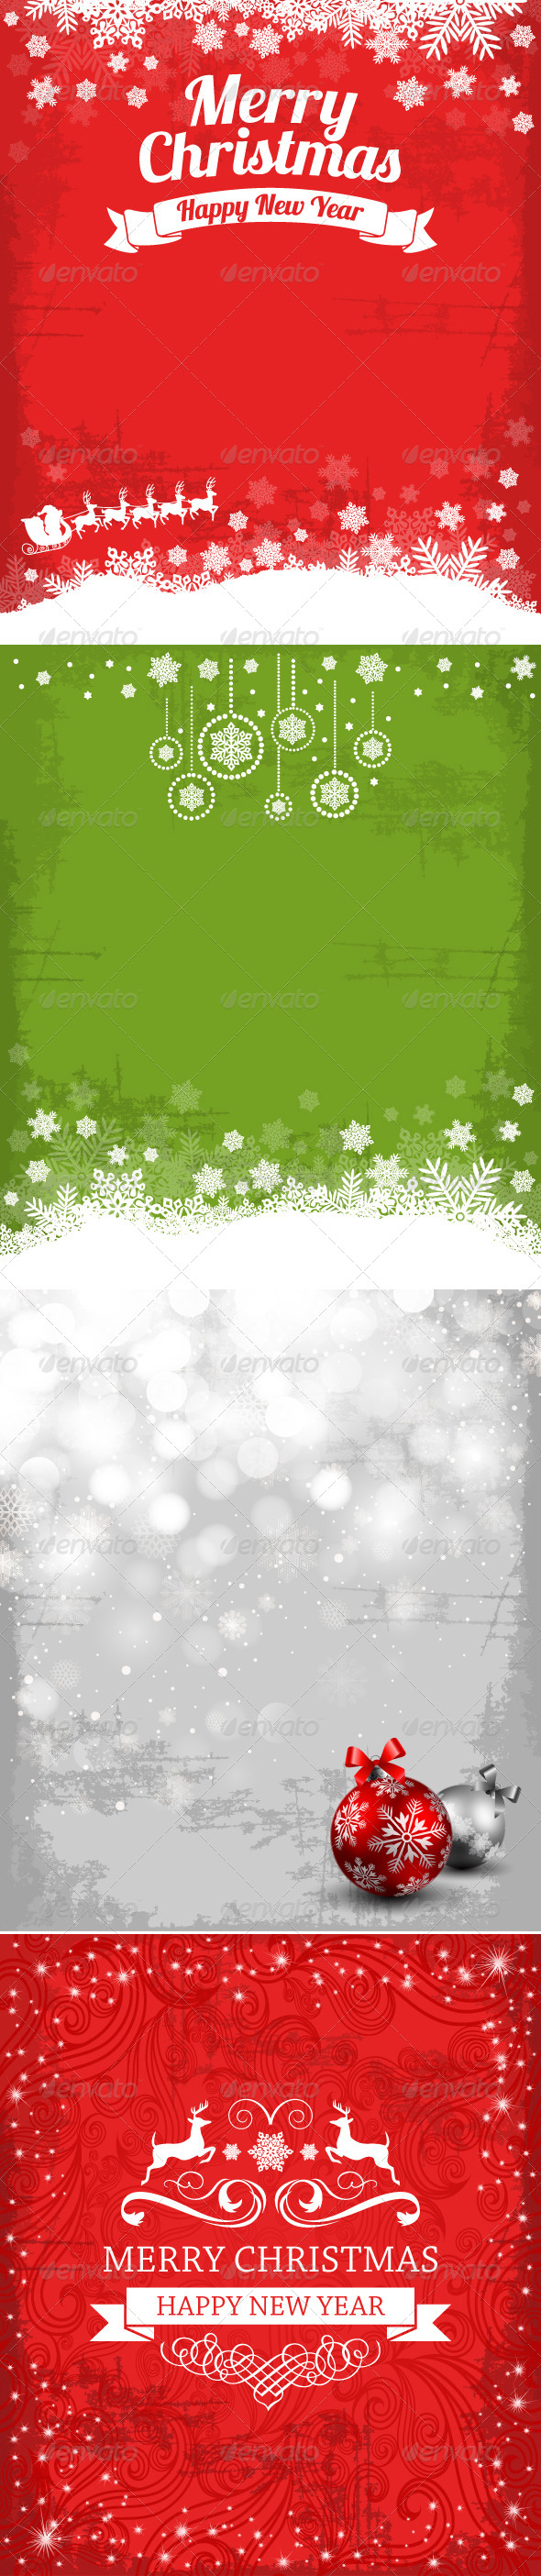 Christmas and Holiday Backgrounds